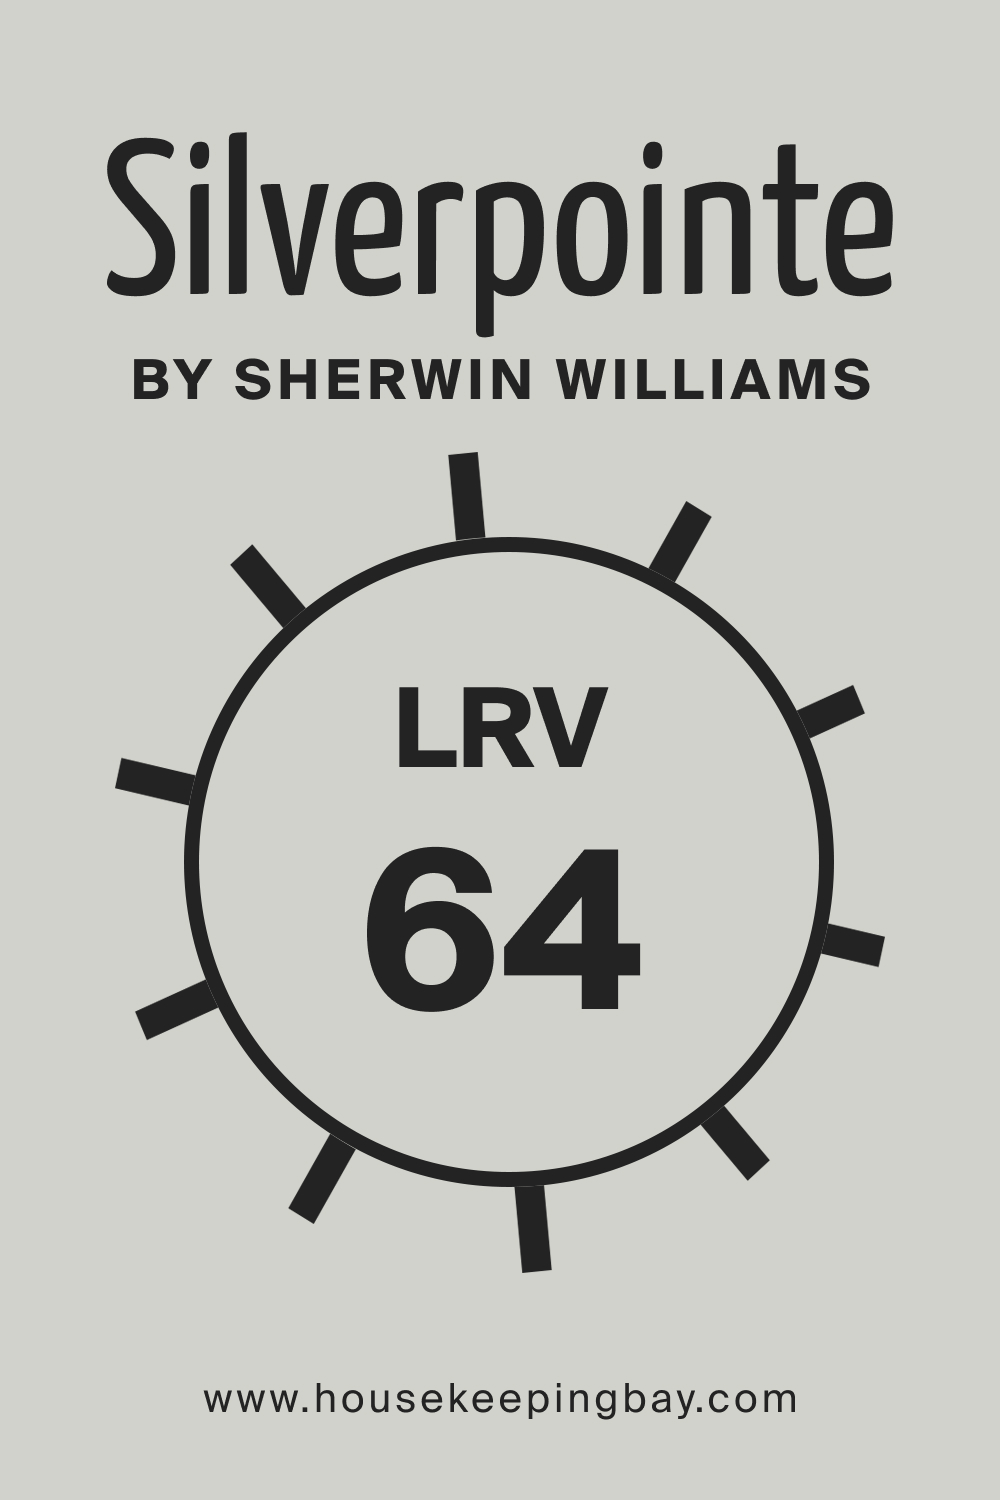 SW Silverpointe by Sherwin Williams. LRV – 64